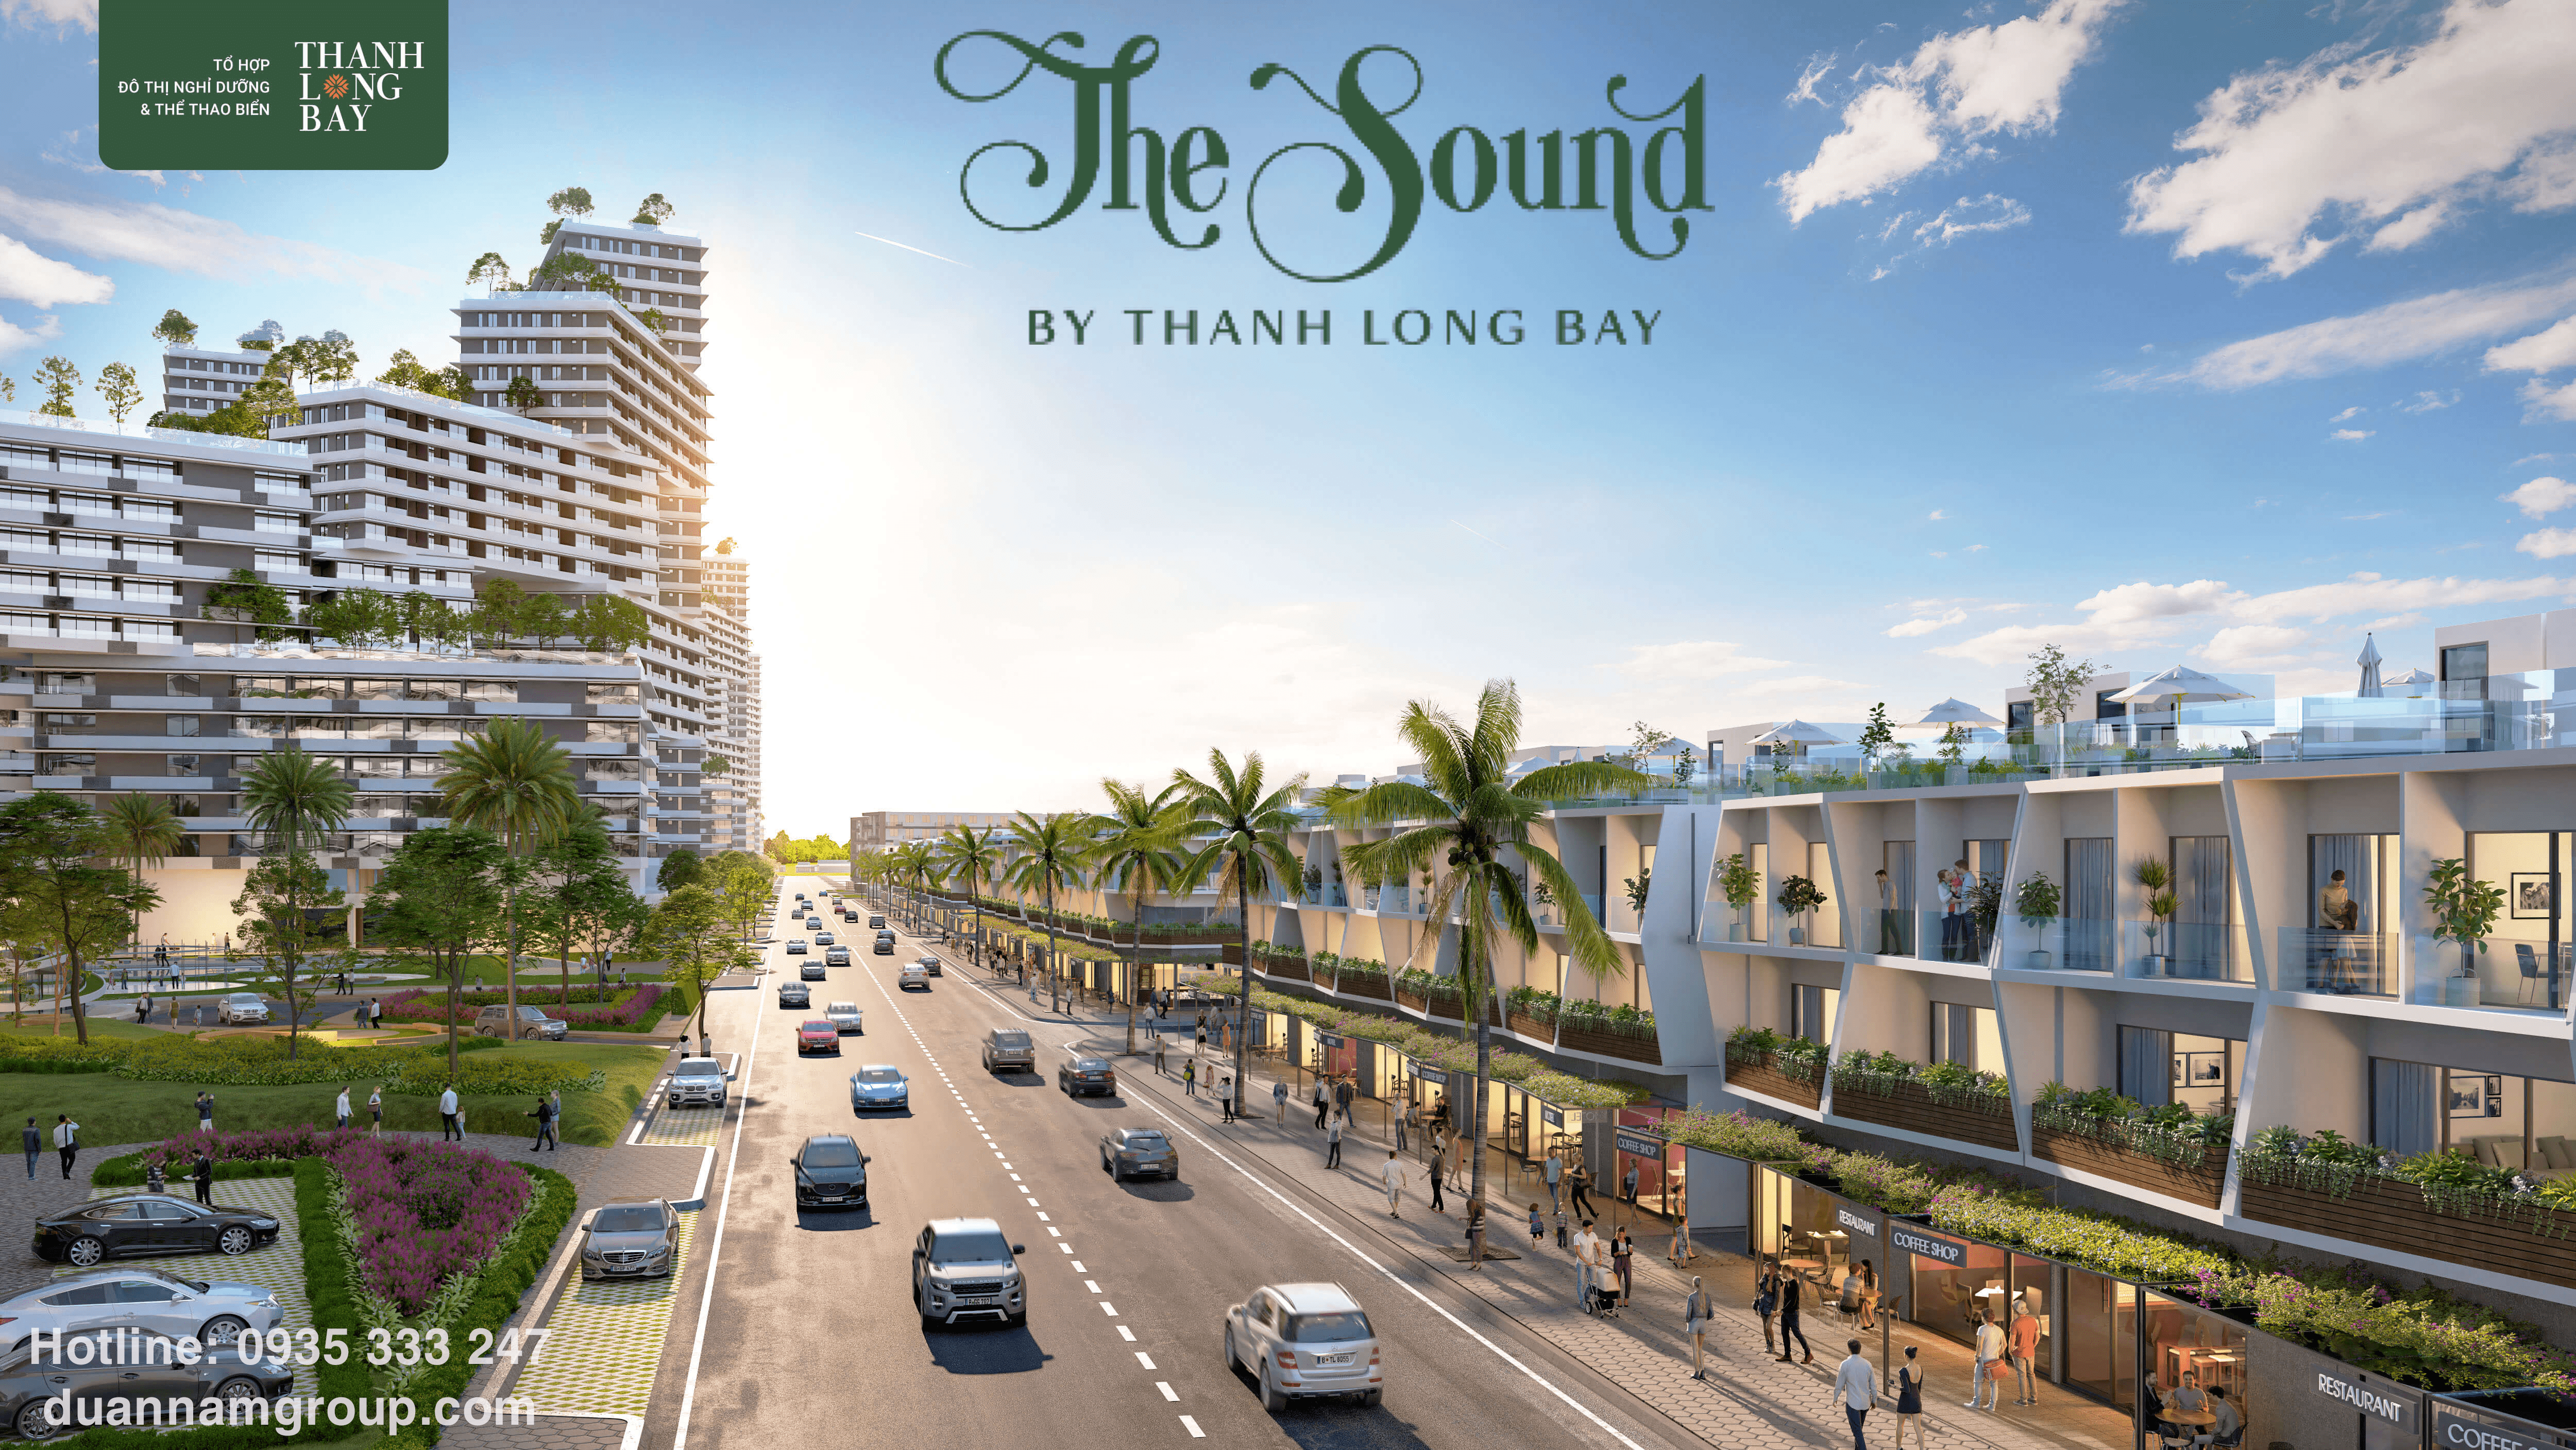 The Sound Thanh Long Bay